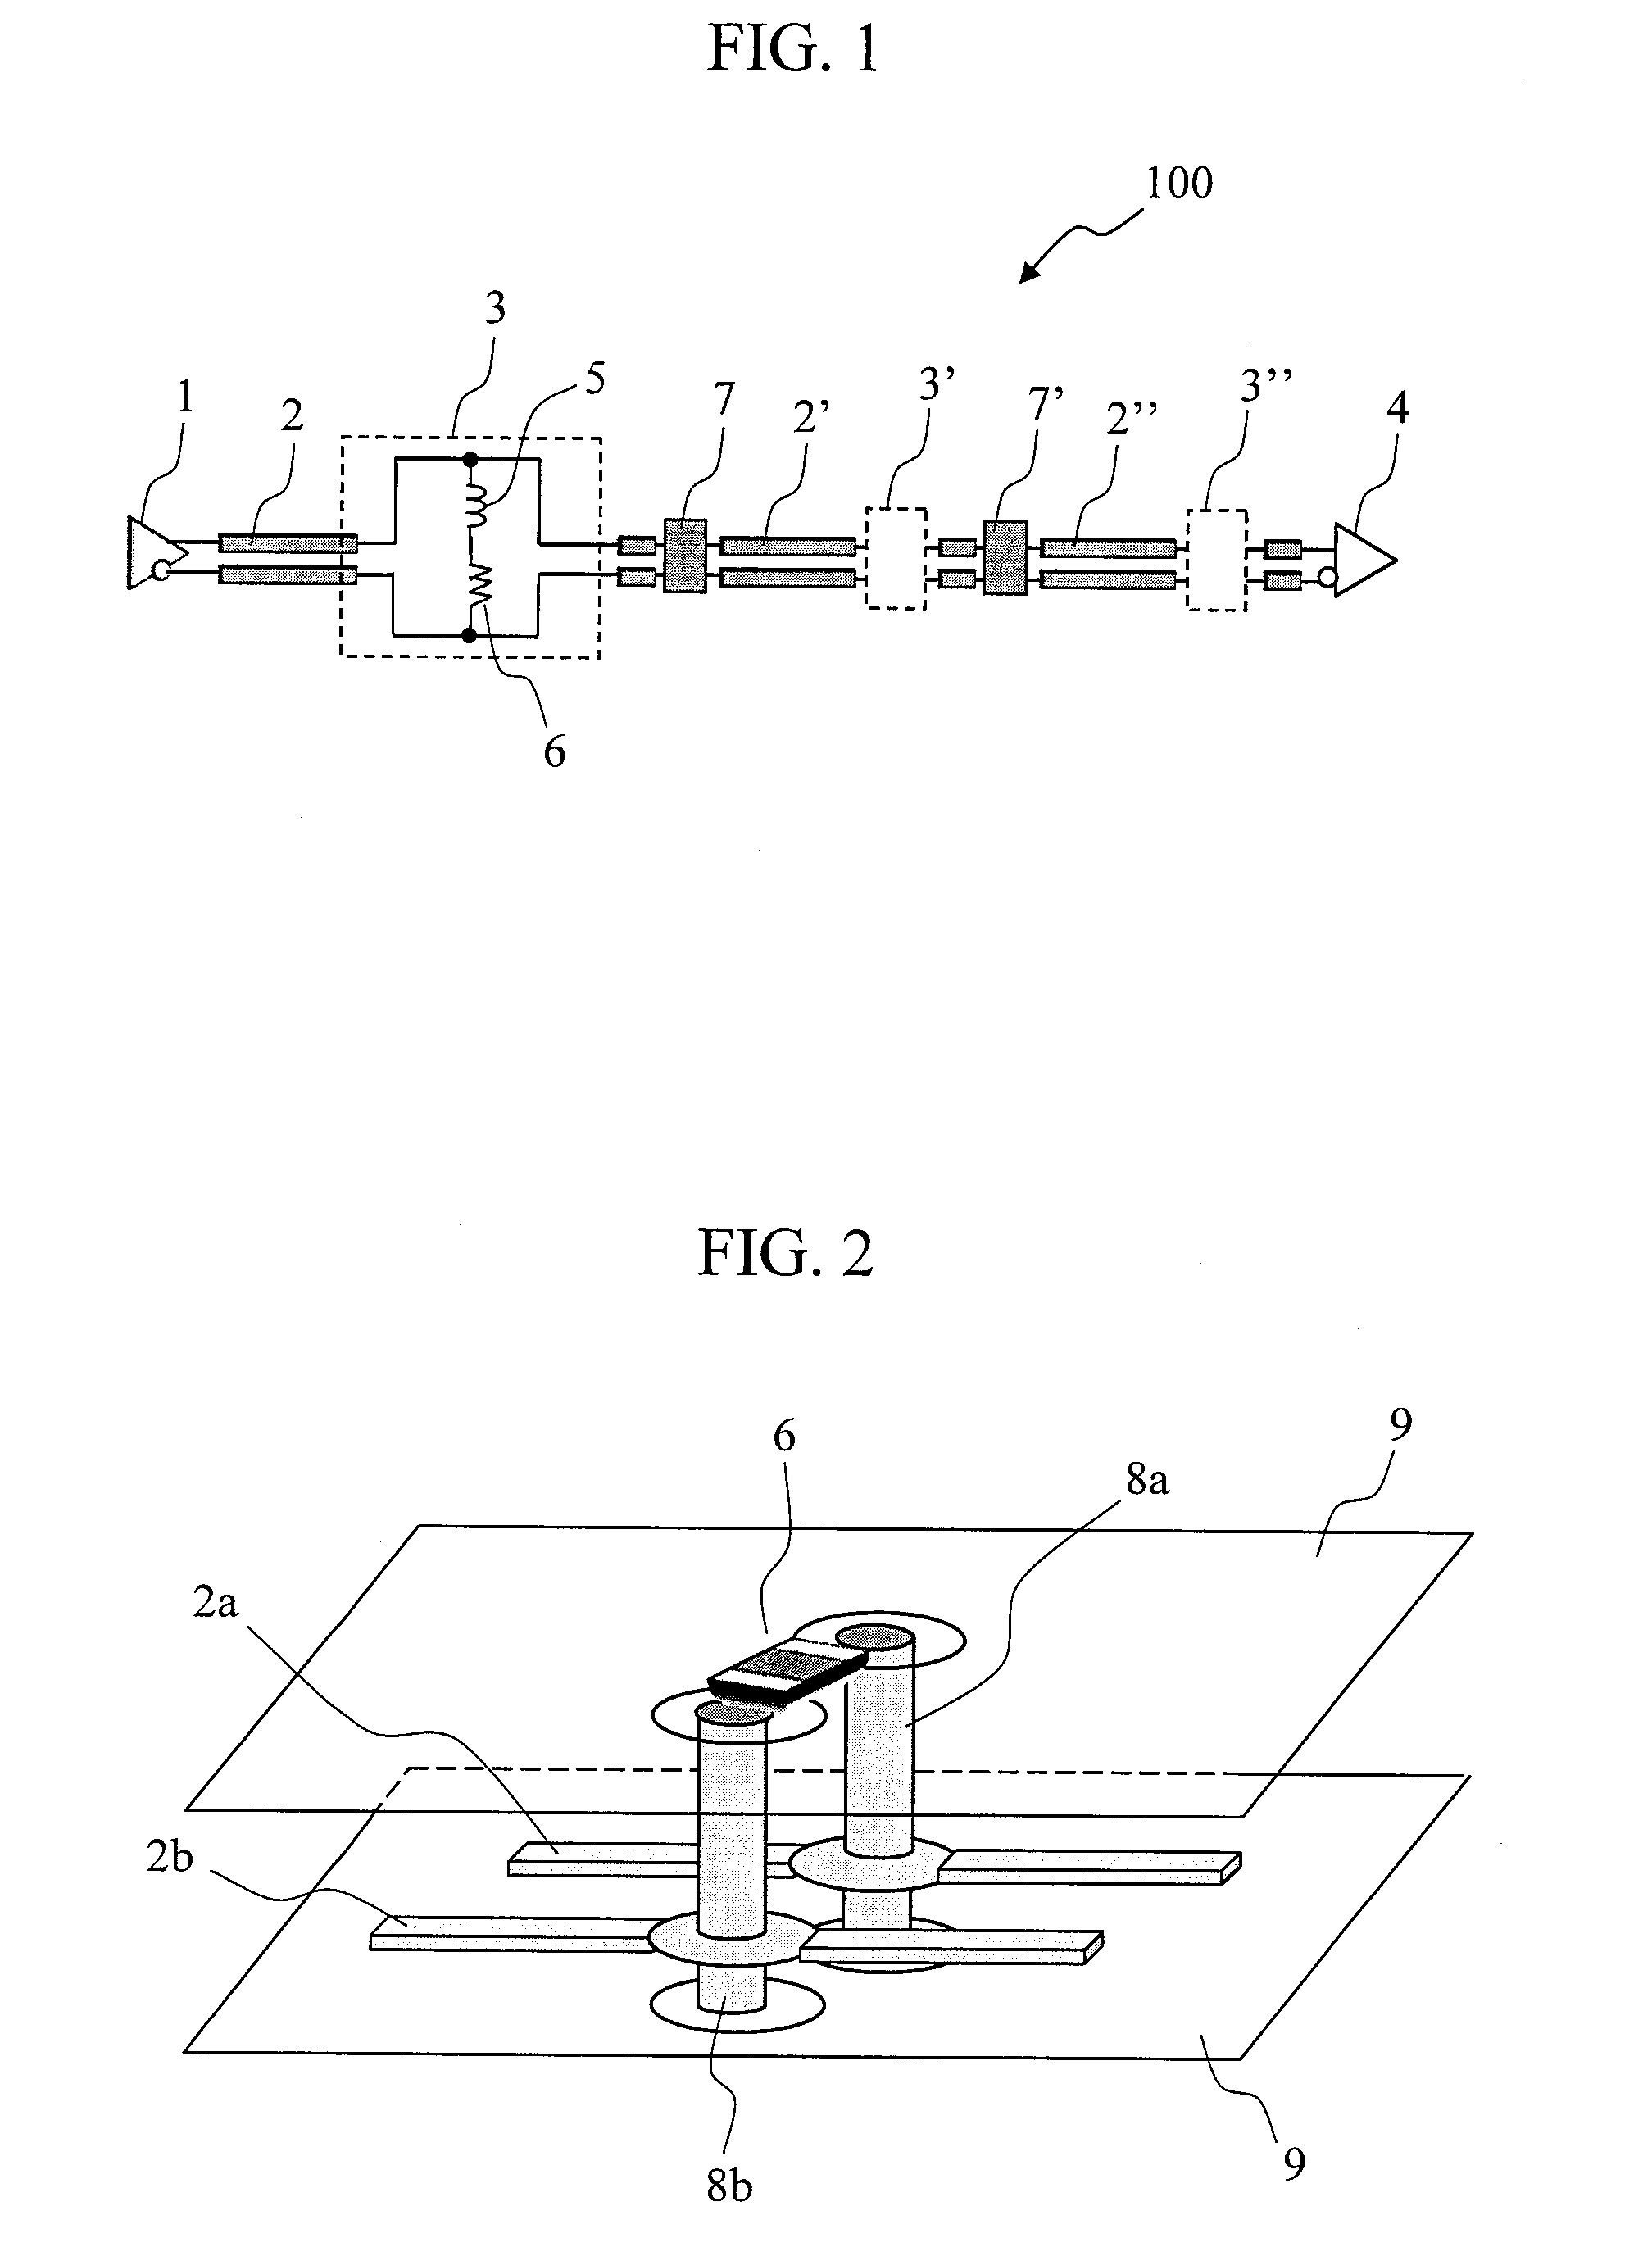 Equalizer Circuit and Printed Circuit Board